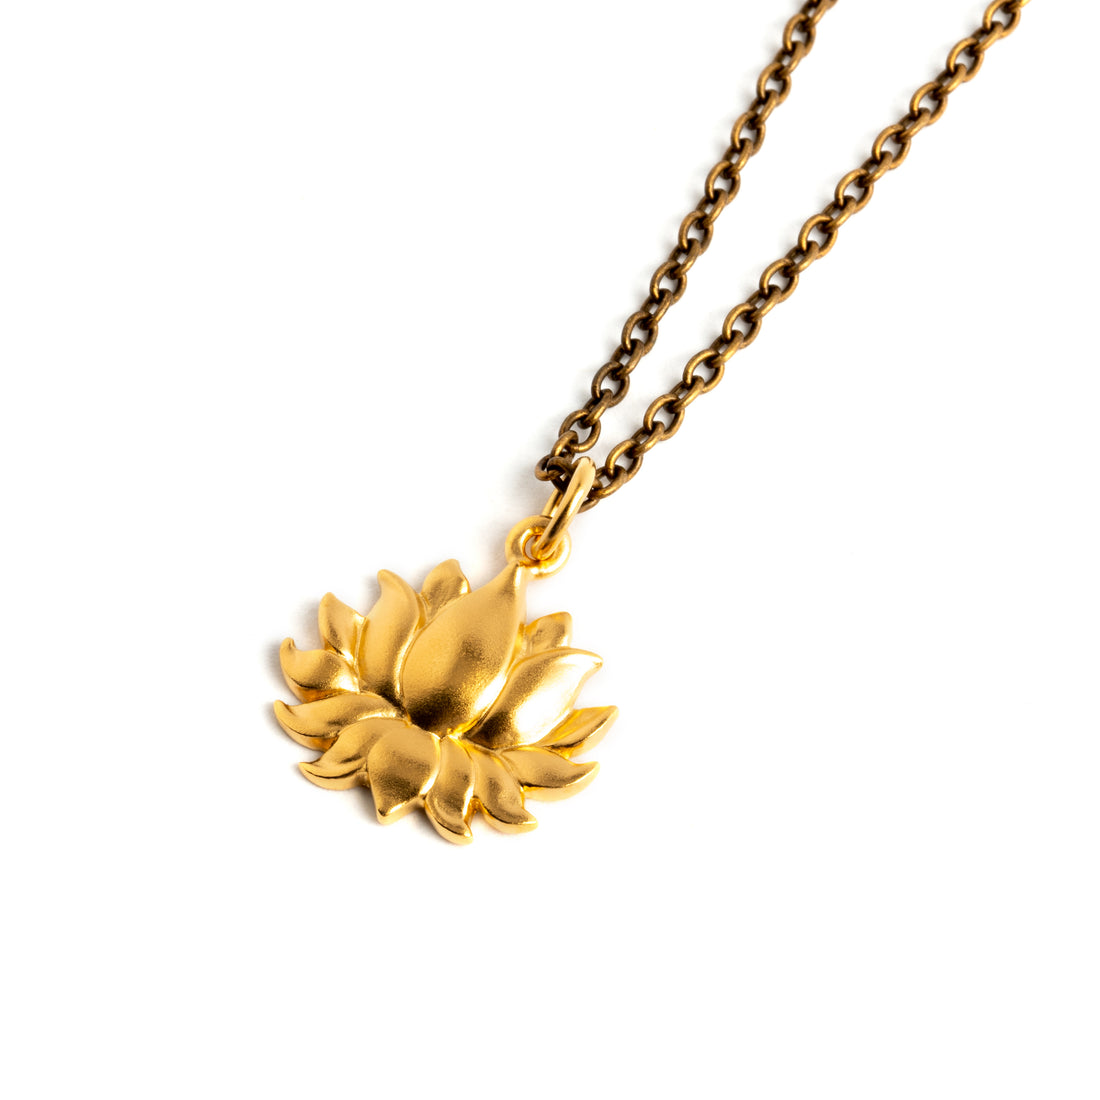 Petite Gold Lotus Charm necklace right side view